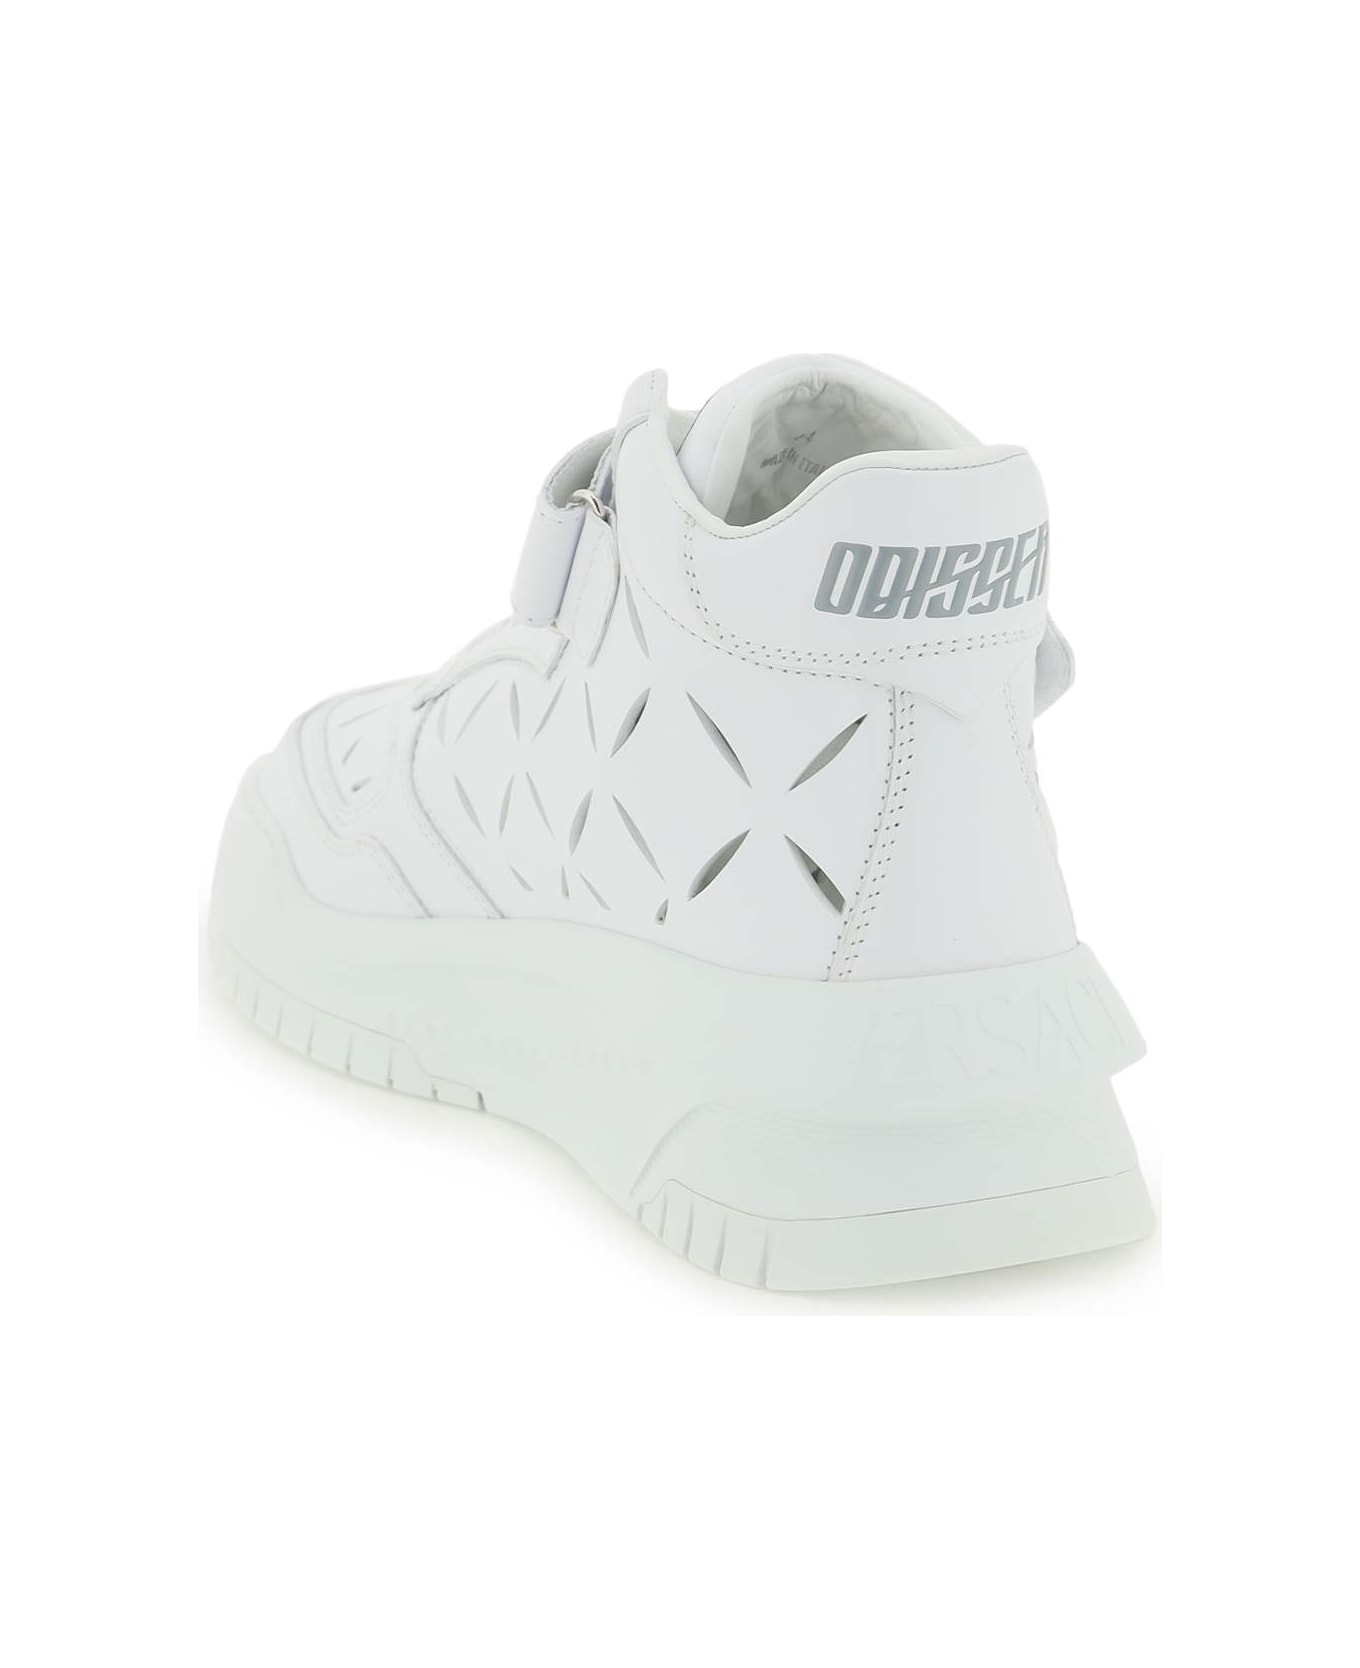 Versace Odissea Leather High-top Sneakers - White スニーカー